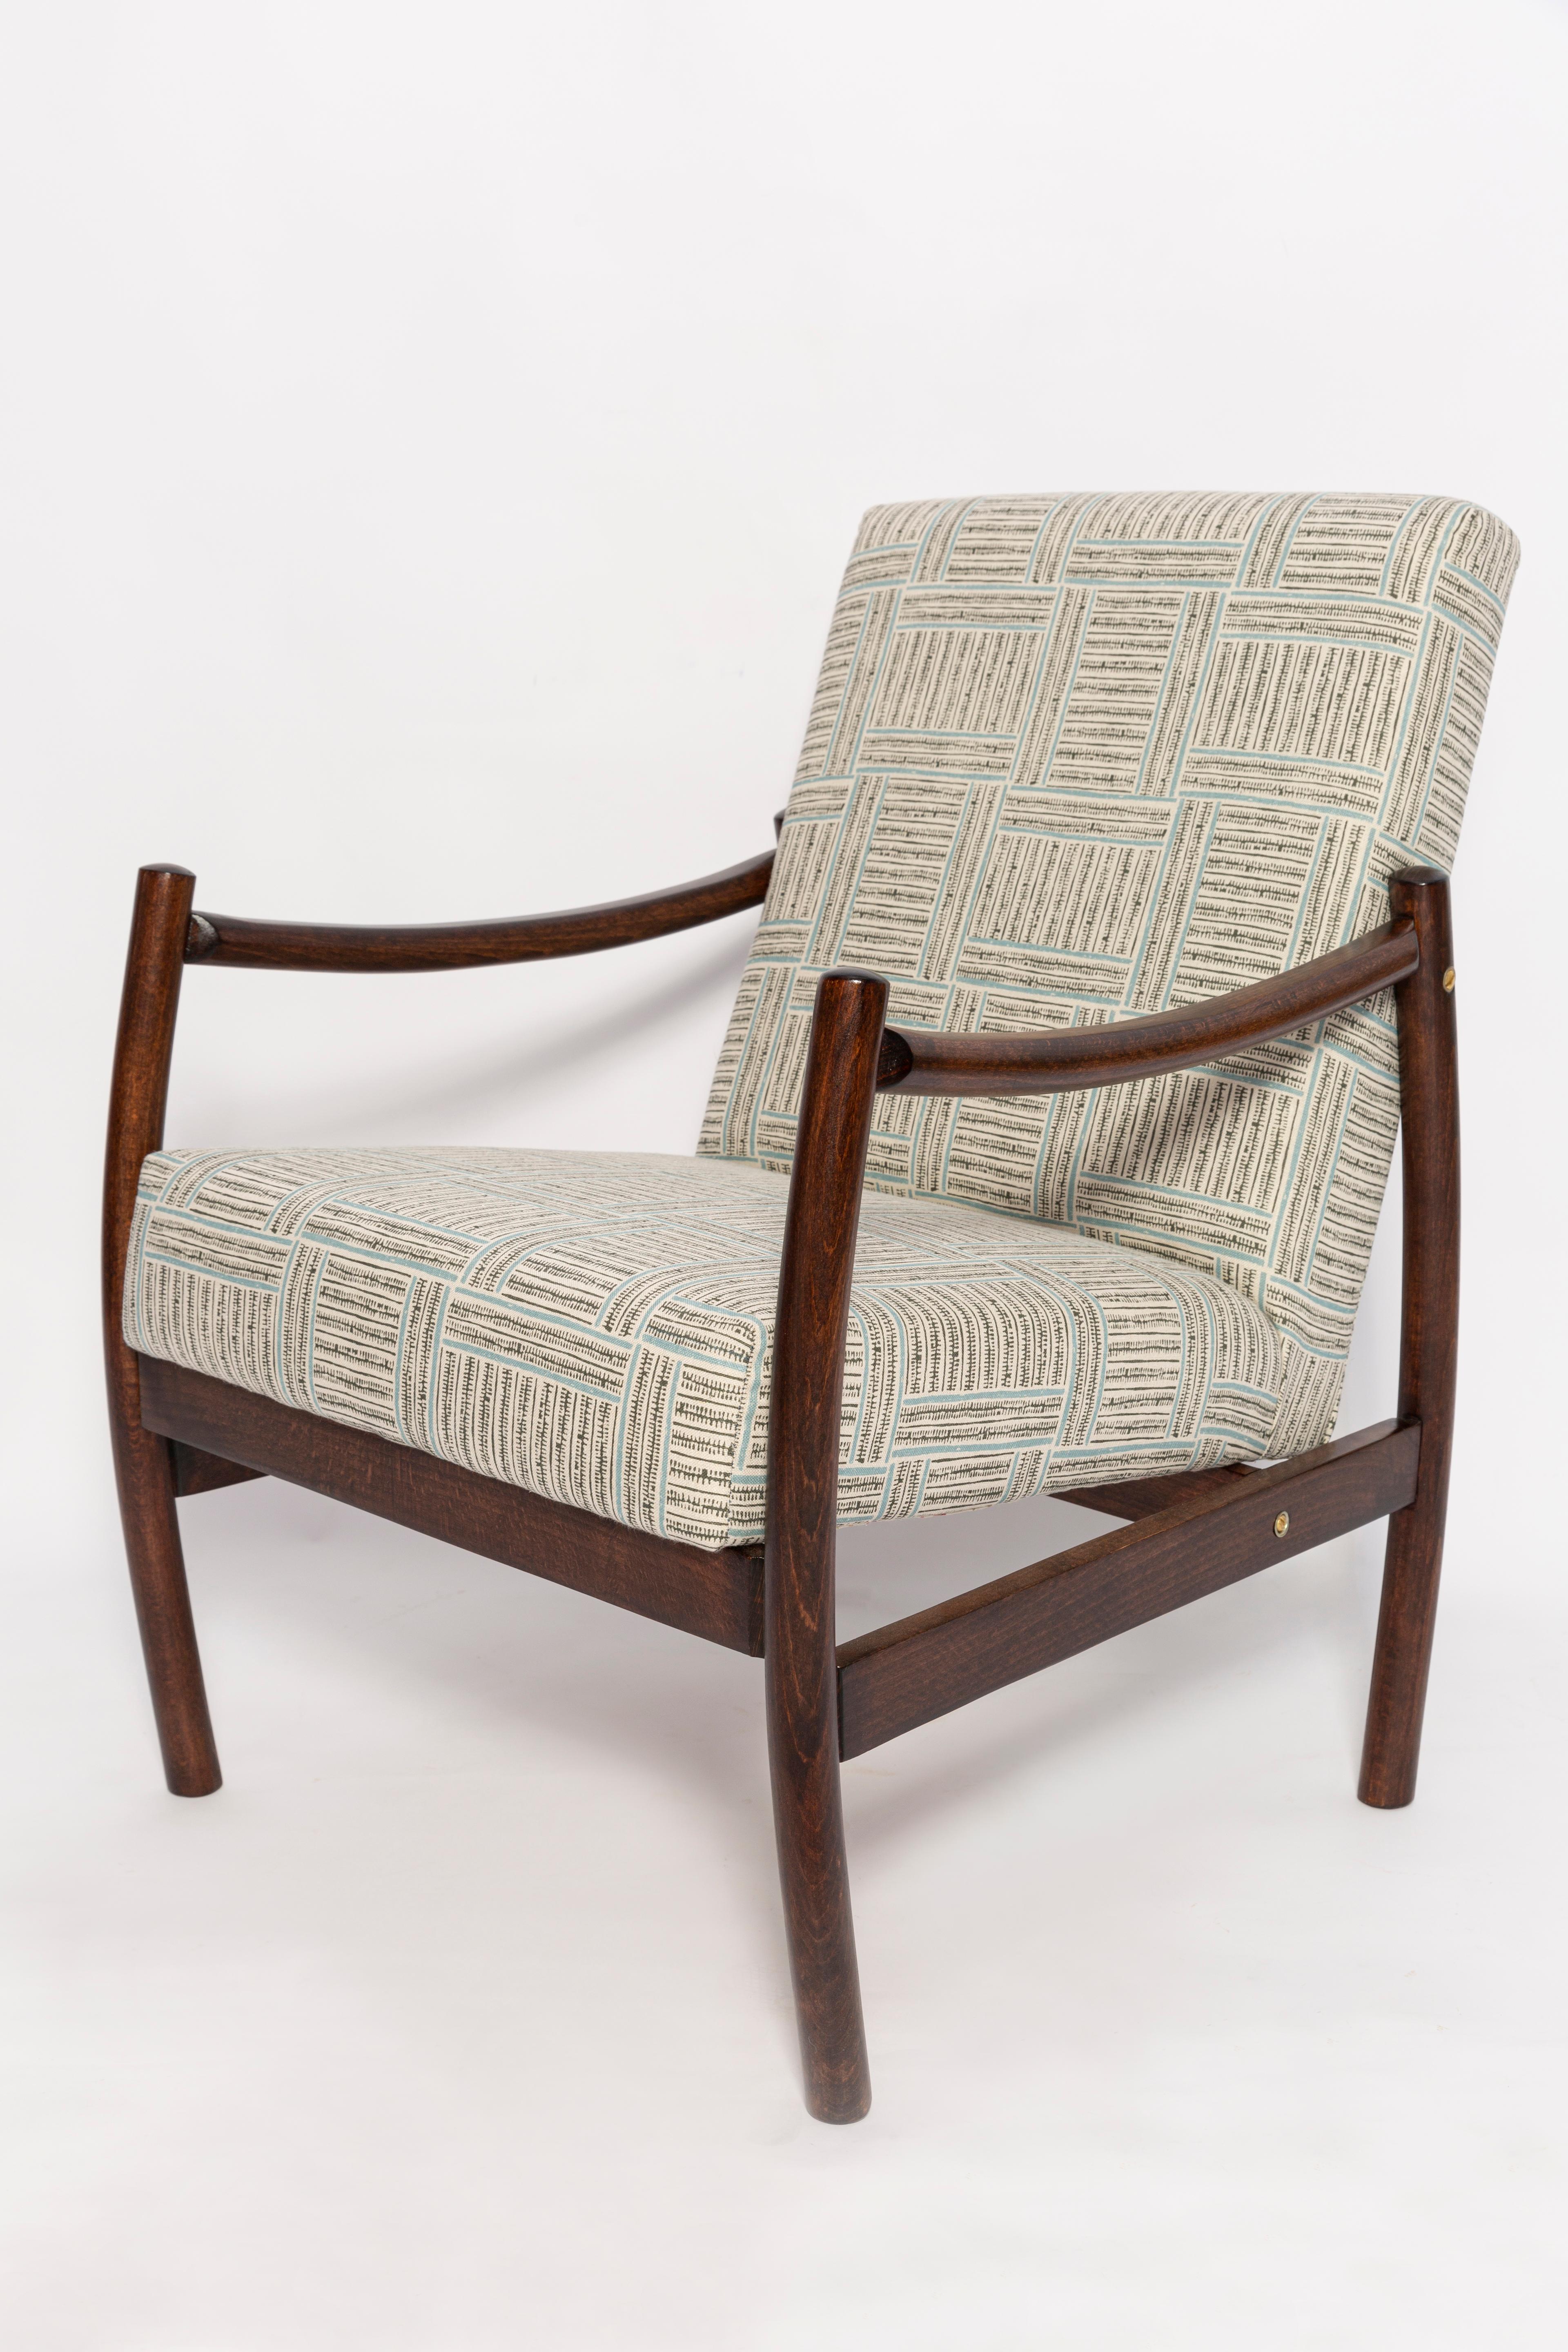 Mid-20th Century Vintage Armchair, Beige and Blue Linen, Europe, 1960s For Sale 4